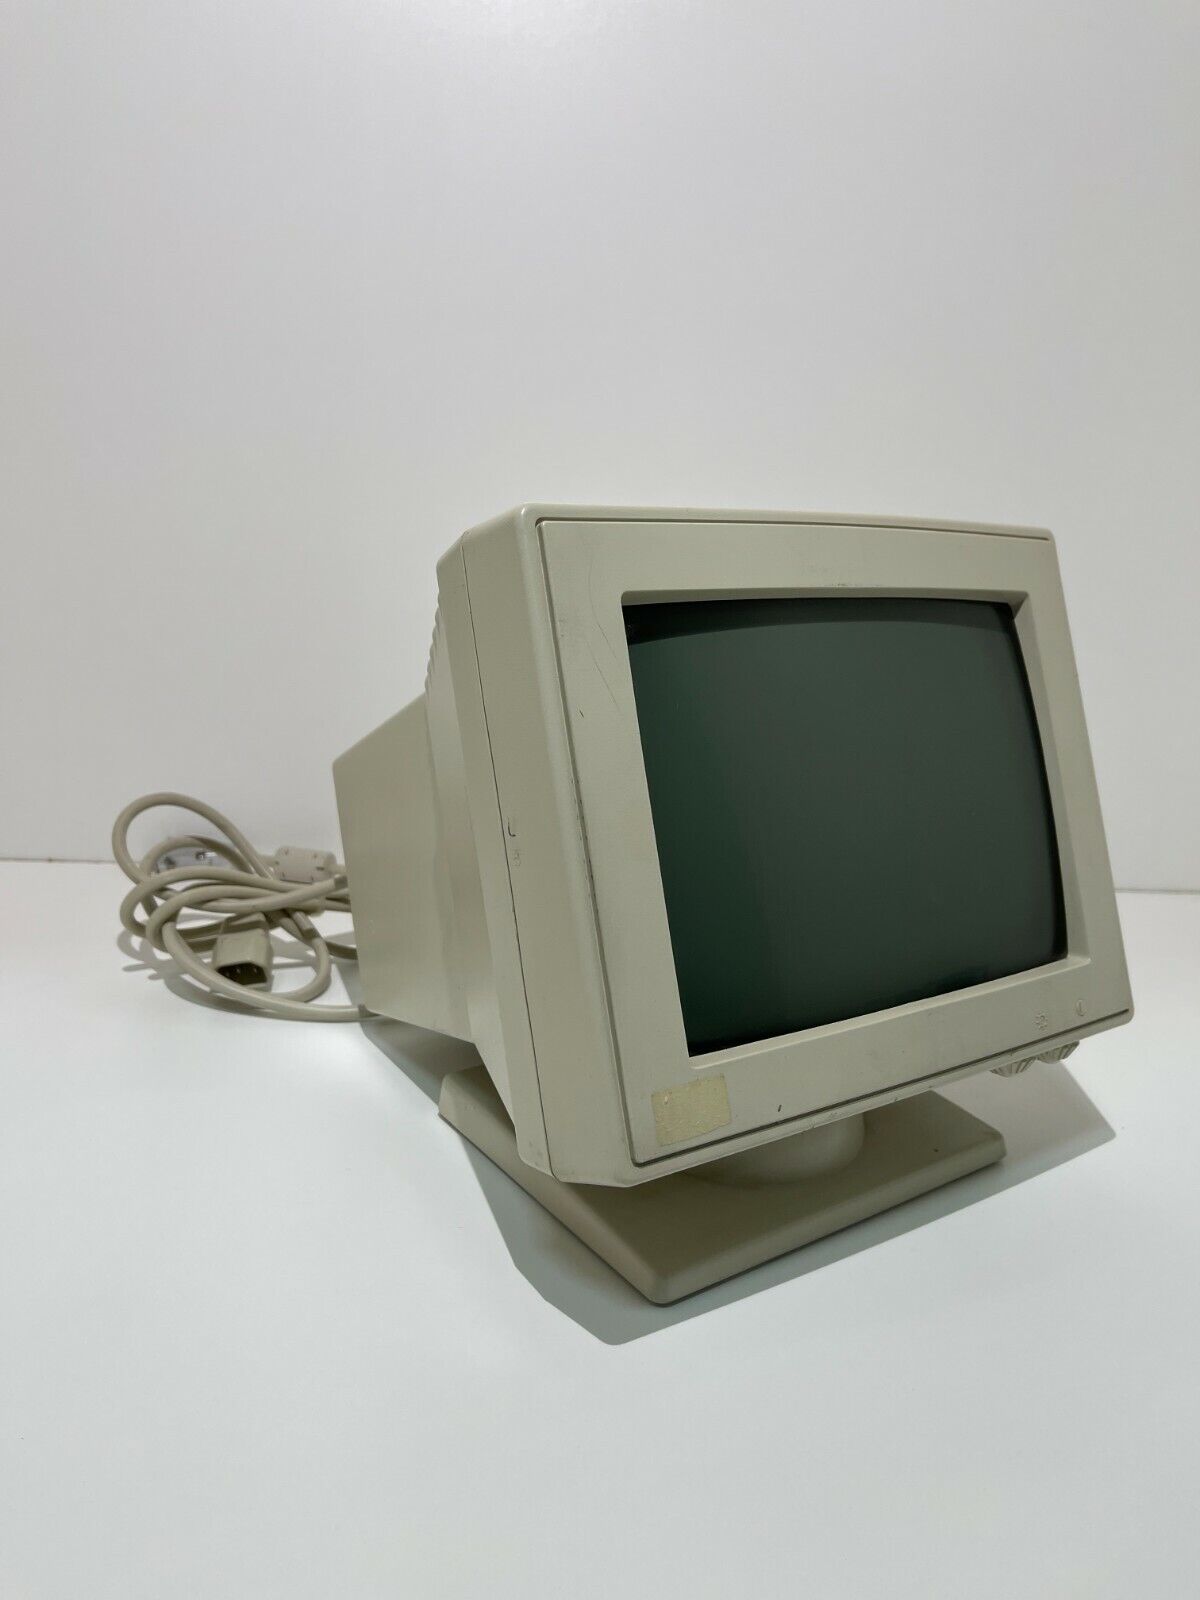 Vintage 10 inch CRT Monitor Griffin Technology 